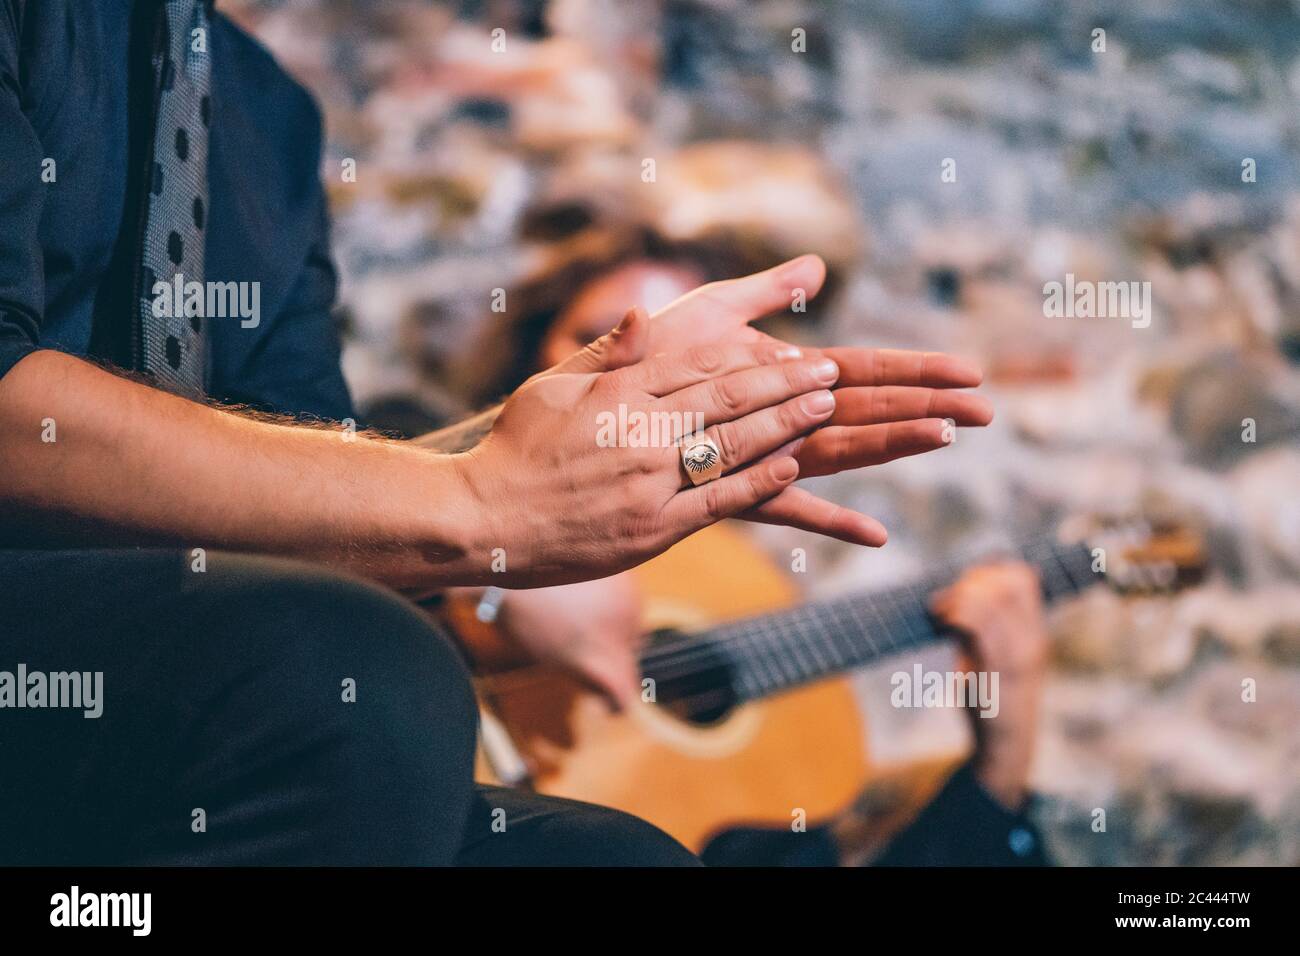 Close-up of singer clapping hands while man playing guitar in club Stock Photo